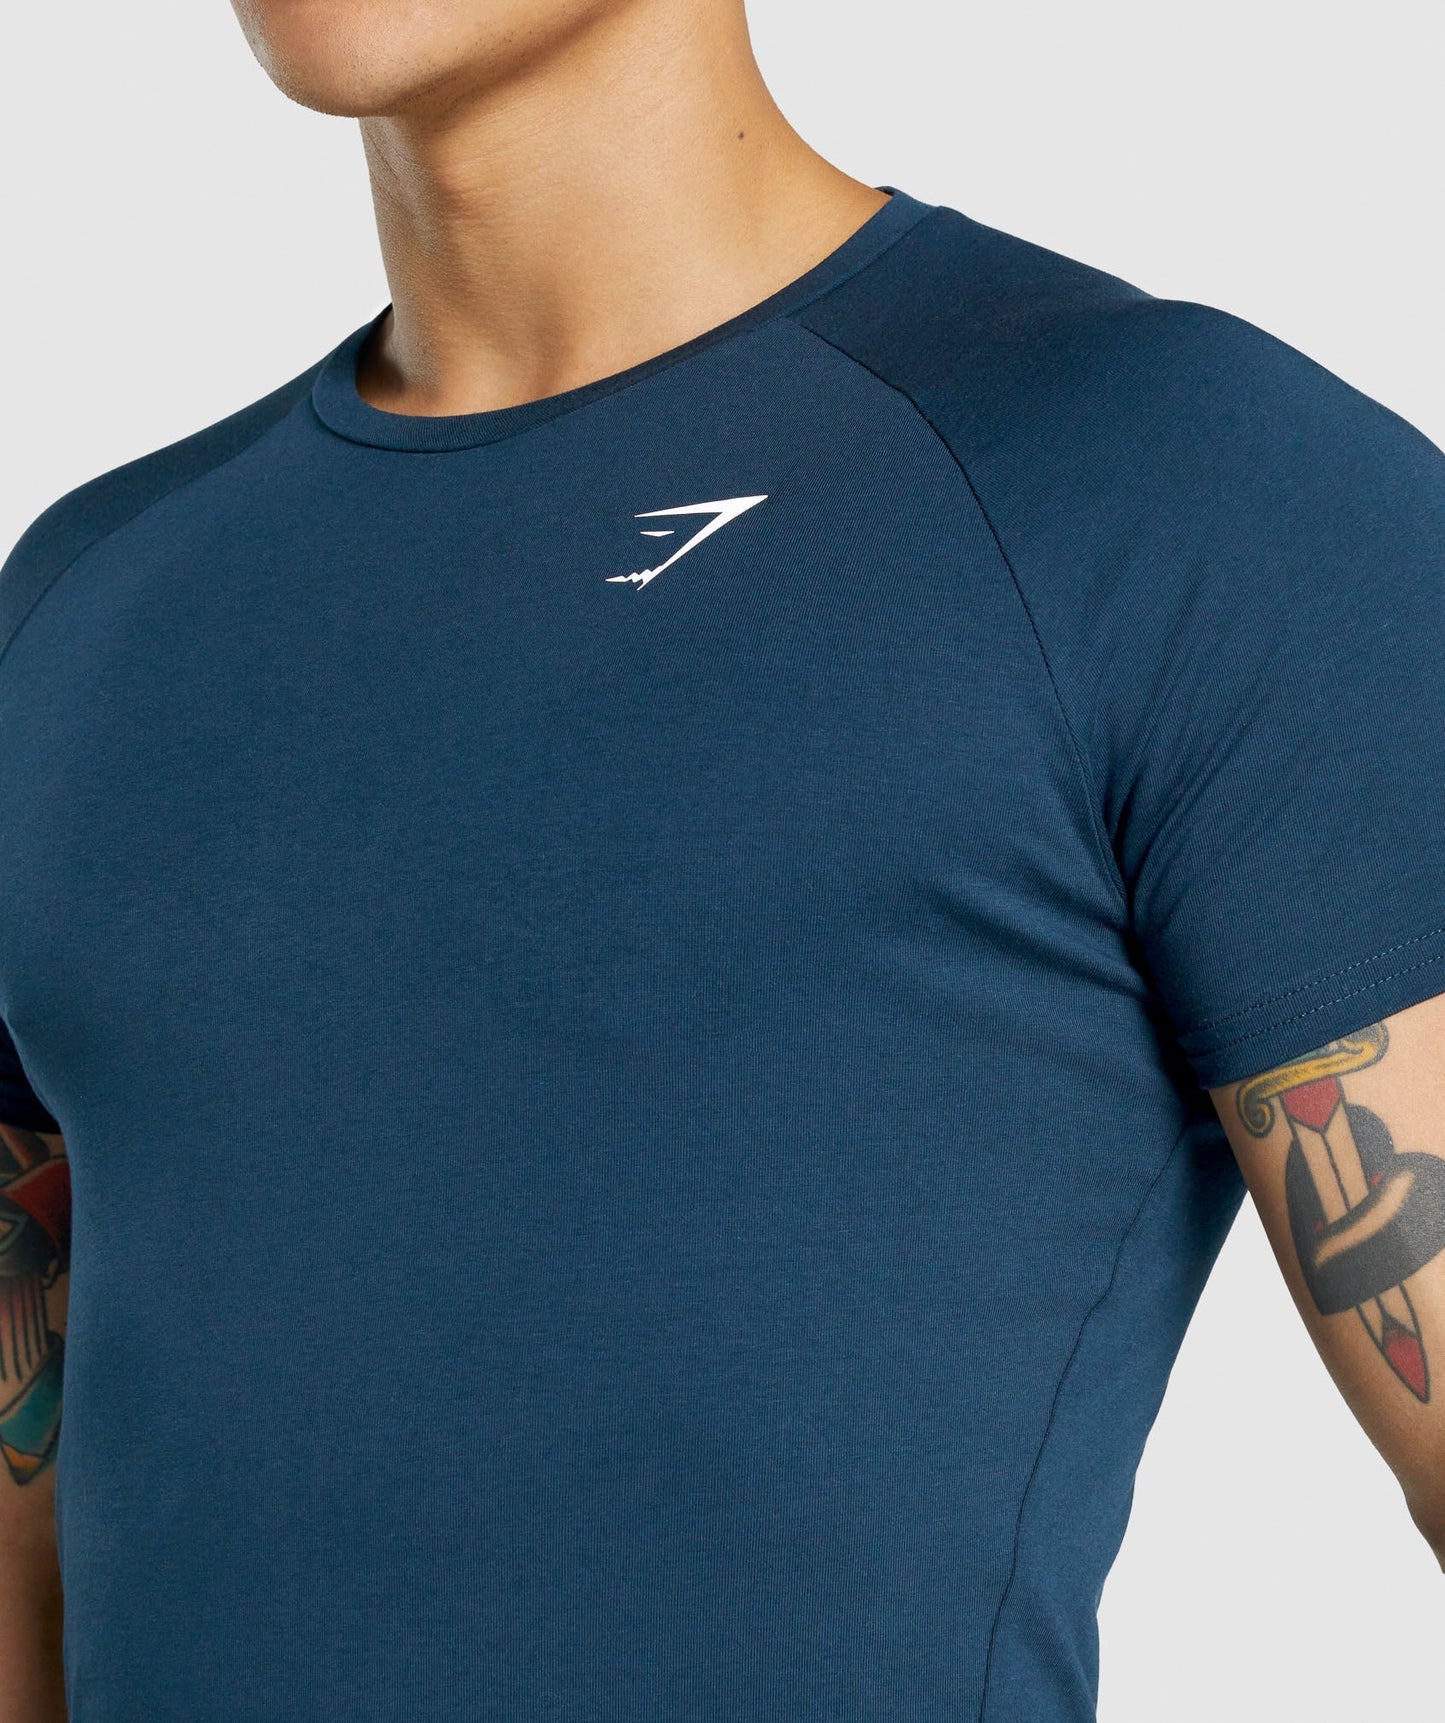 Gymshark Critical 2.0 T-Shirt - Navy – Client 446 100K products